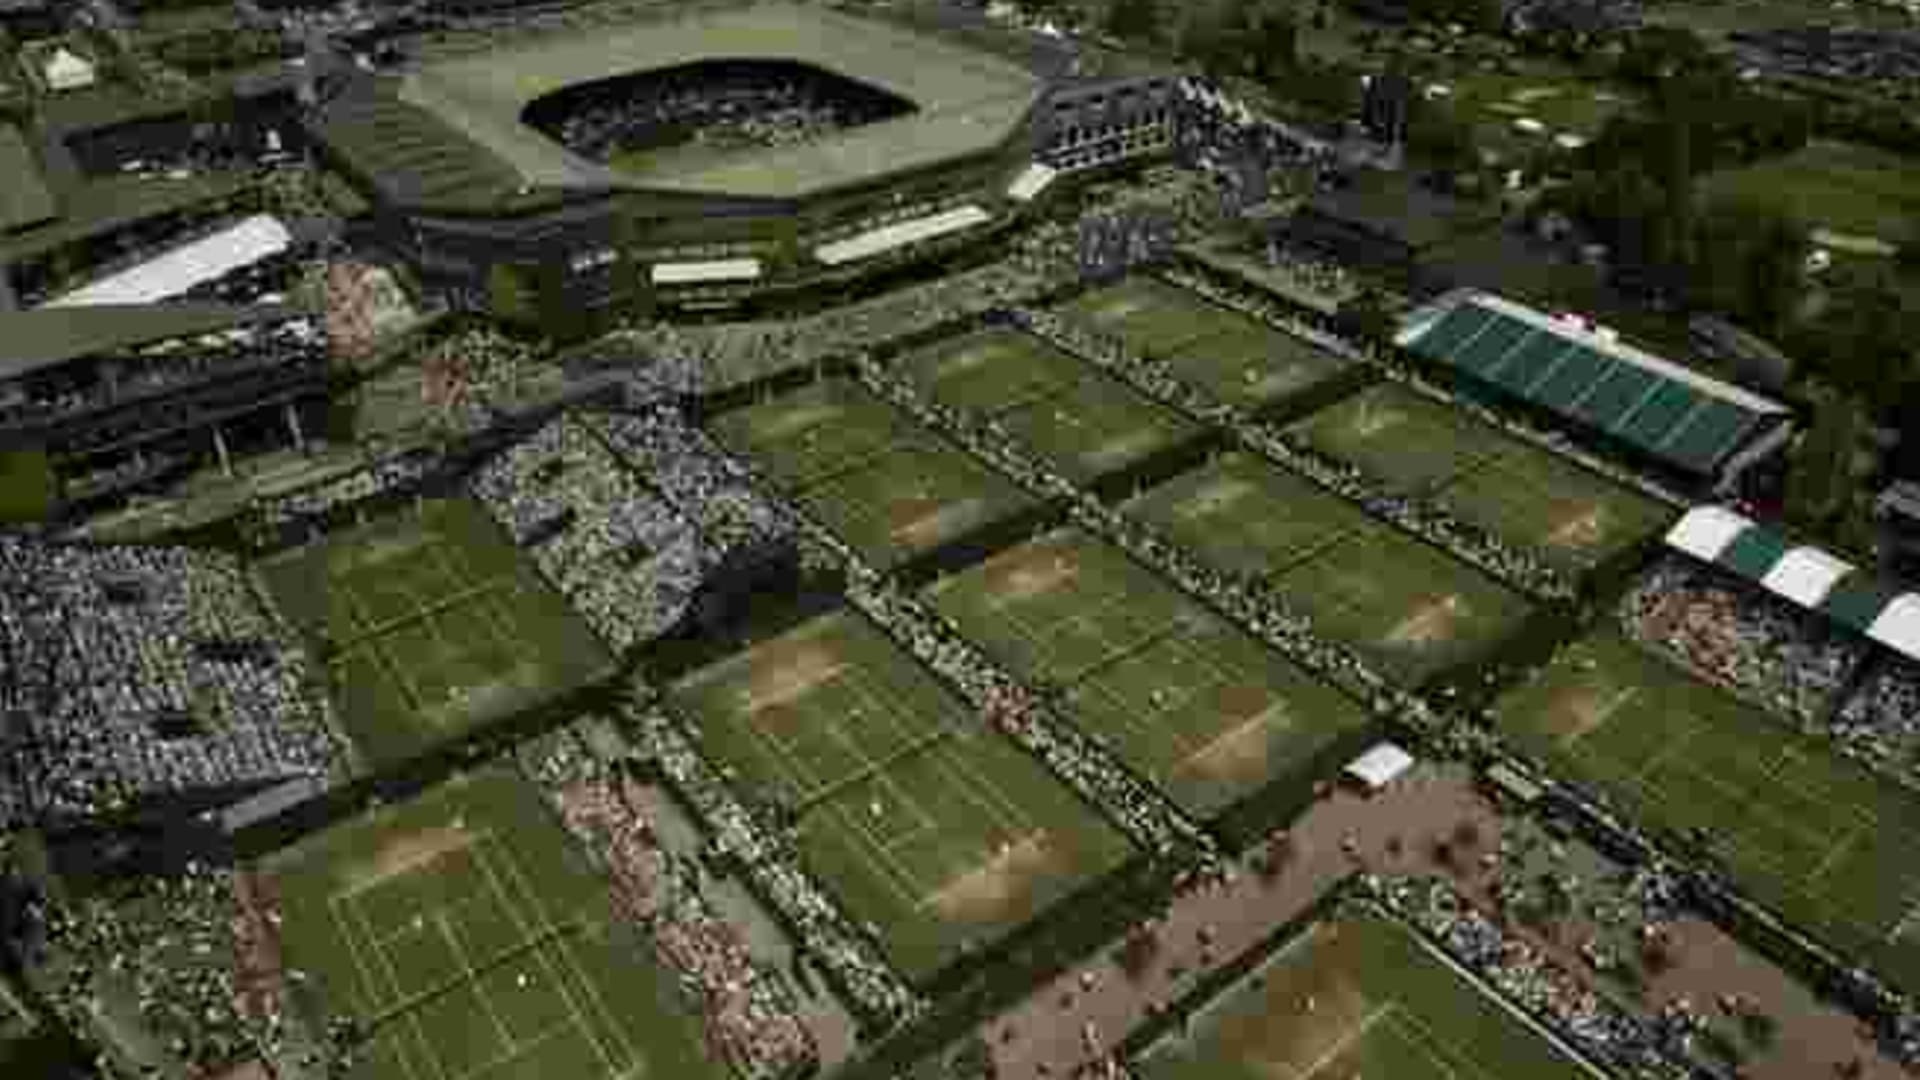 Tennis Channel, Wimbledon agree to new partnership through 2036